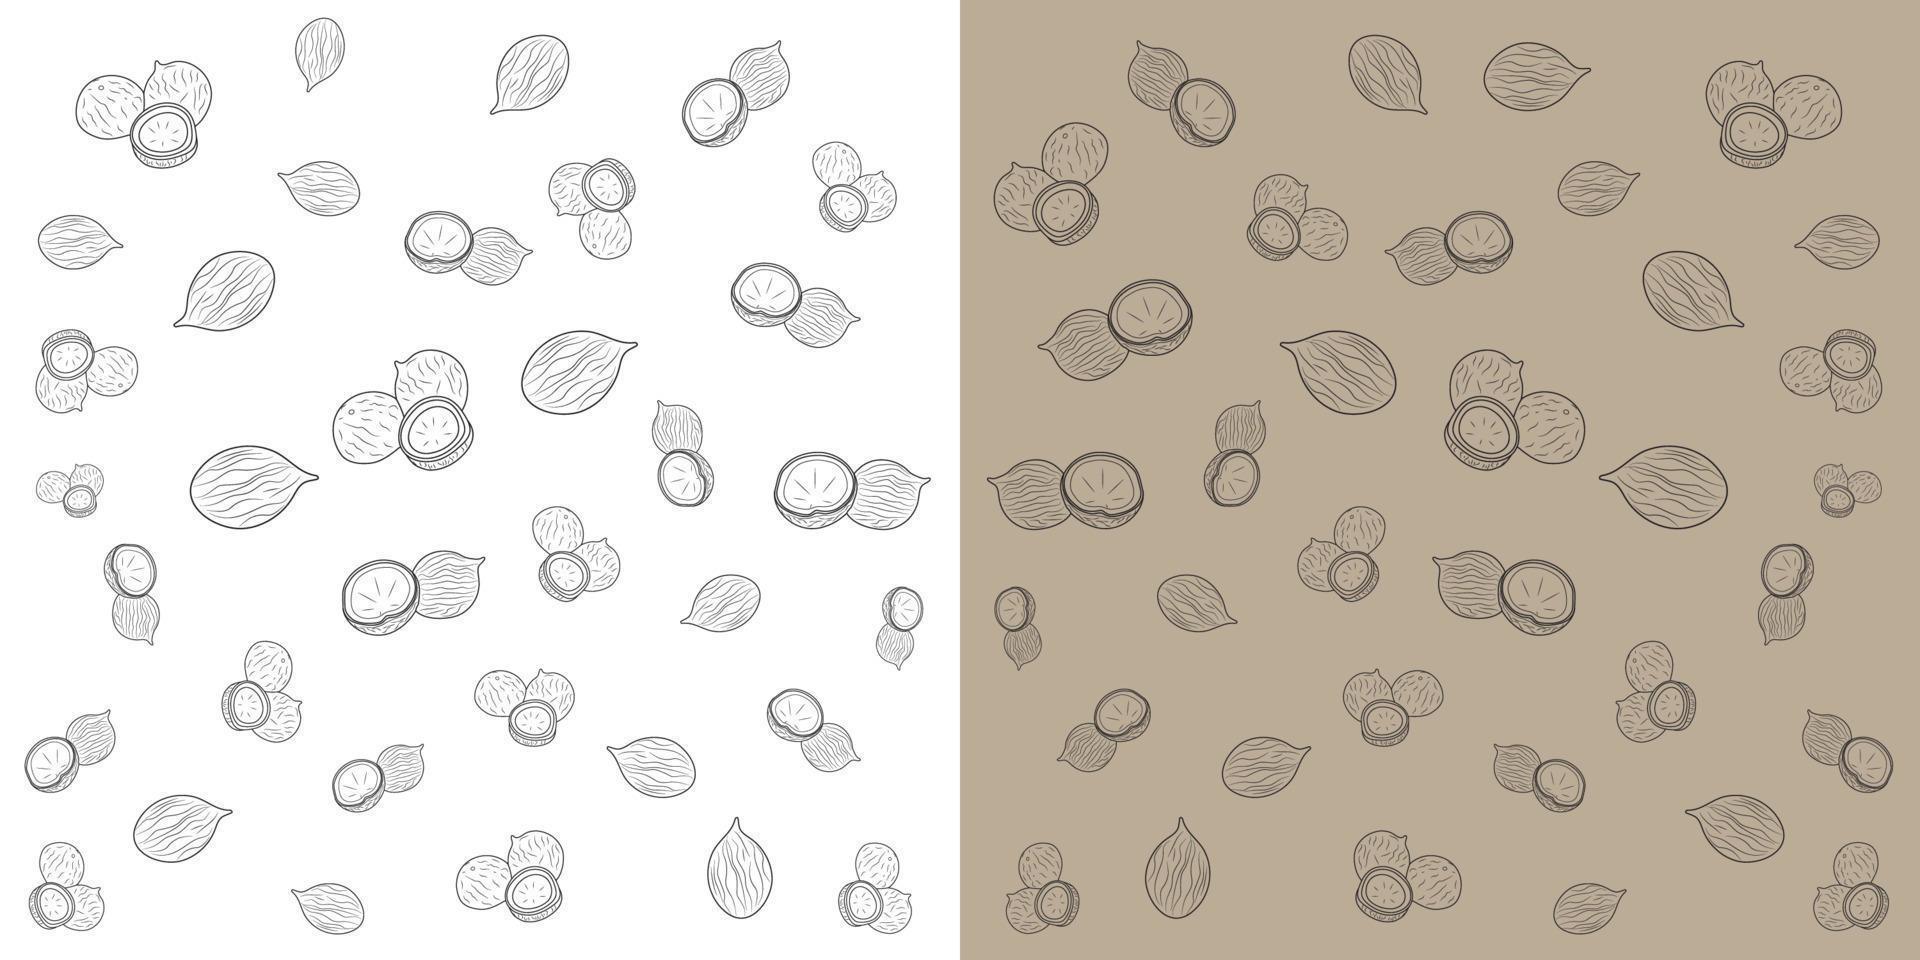 Doodle style Full and half coconut. Vector illustration on white light brown Background.Doodle fruit icons illustration.